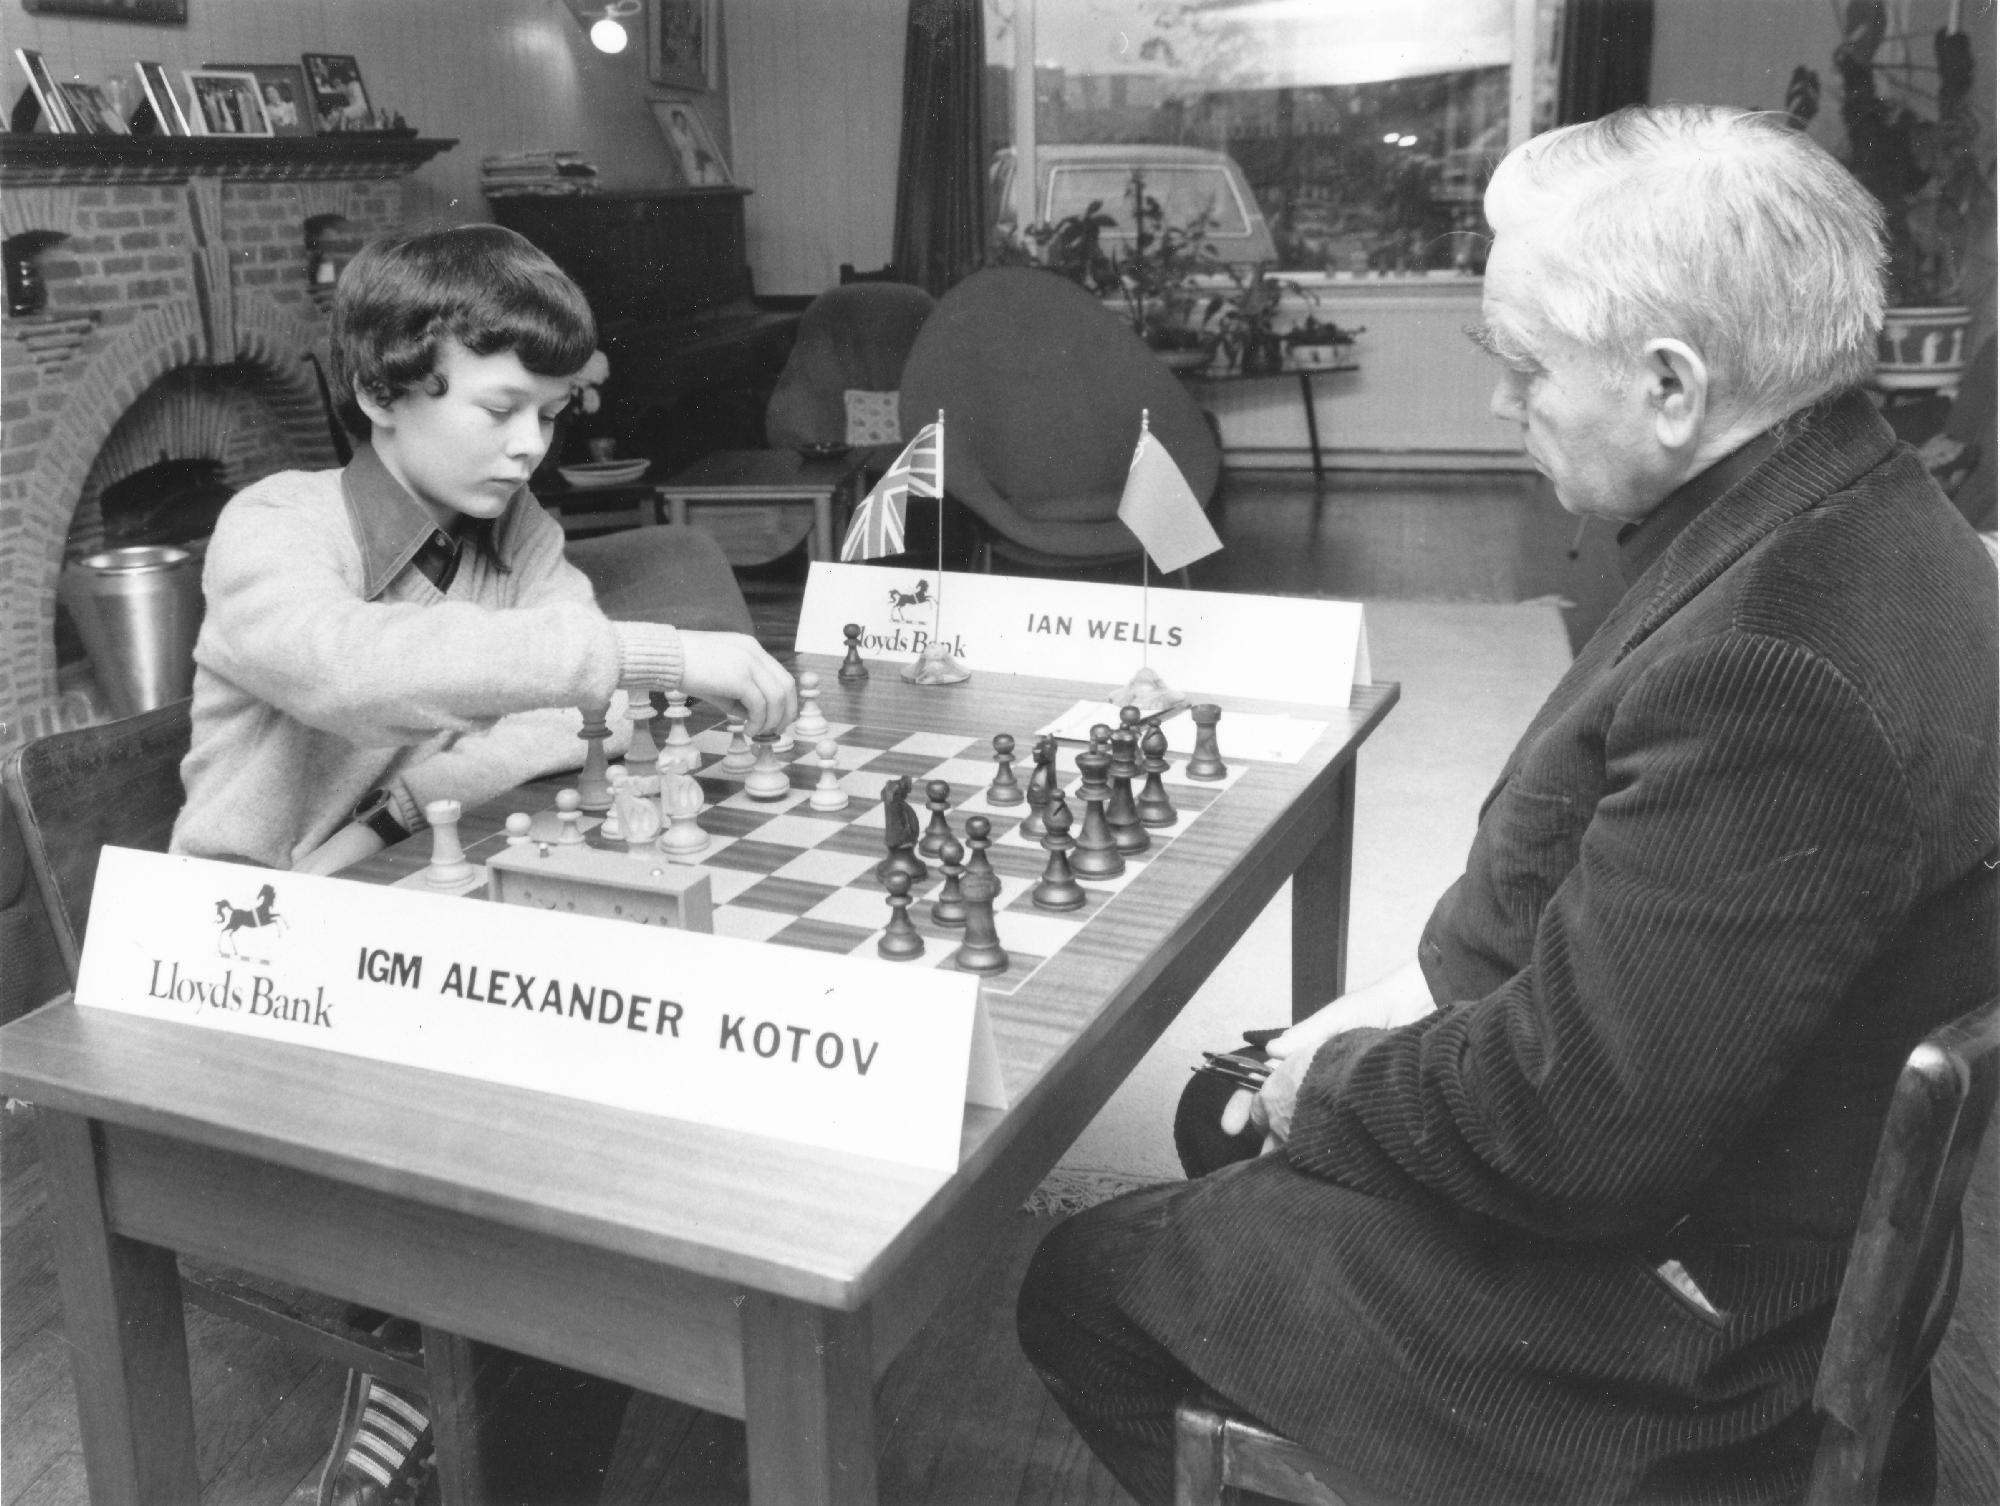 Ian Wells plays GM Alexander Kotov at the home of Mike Fox